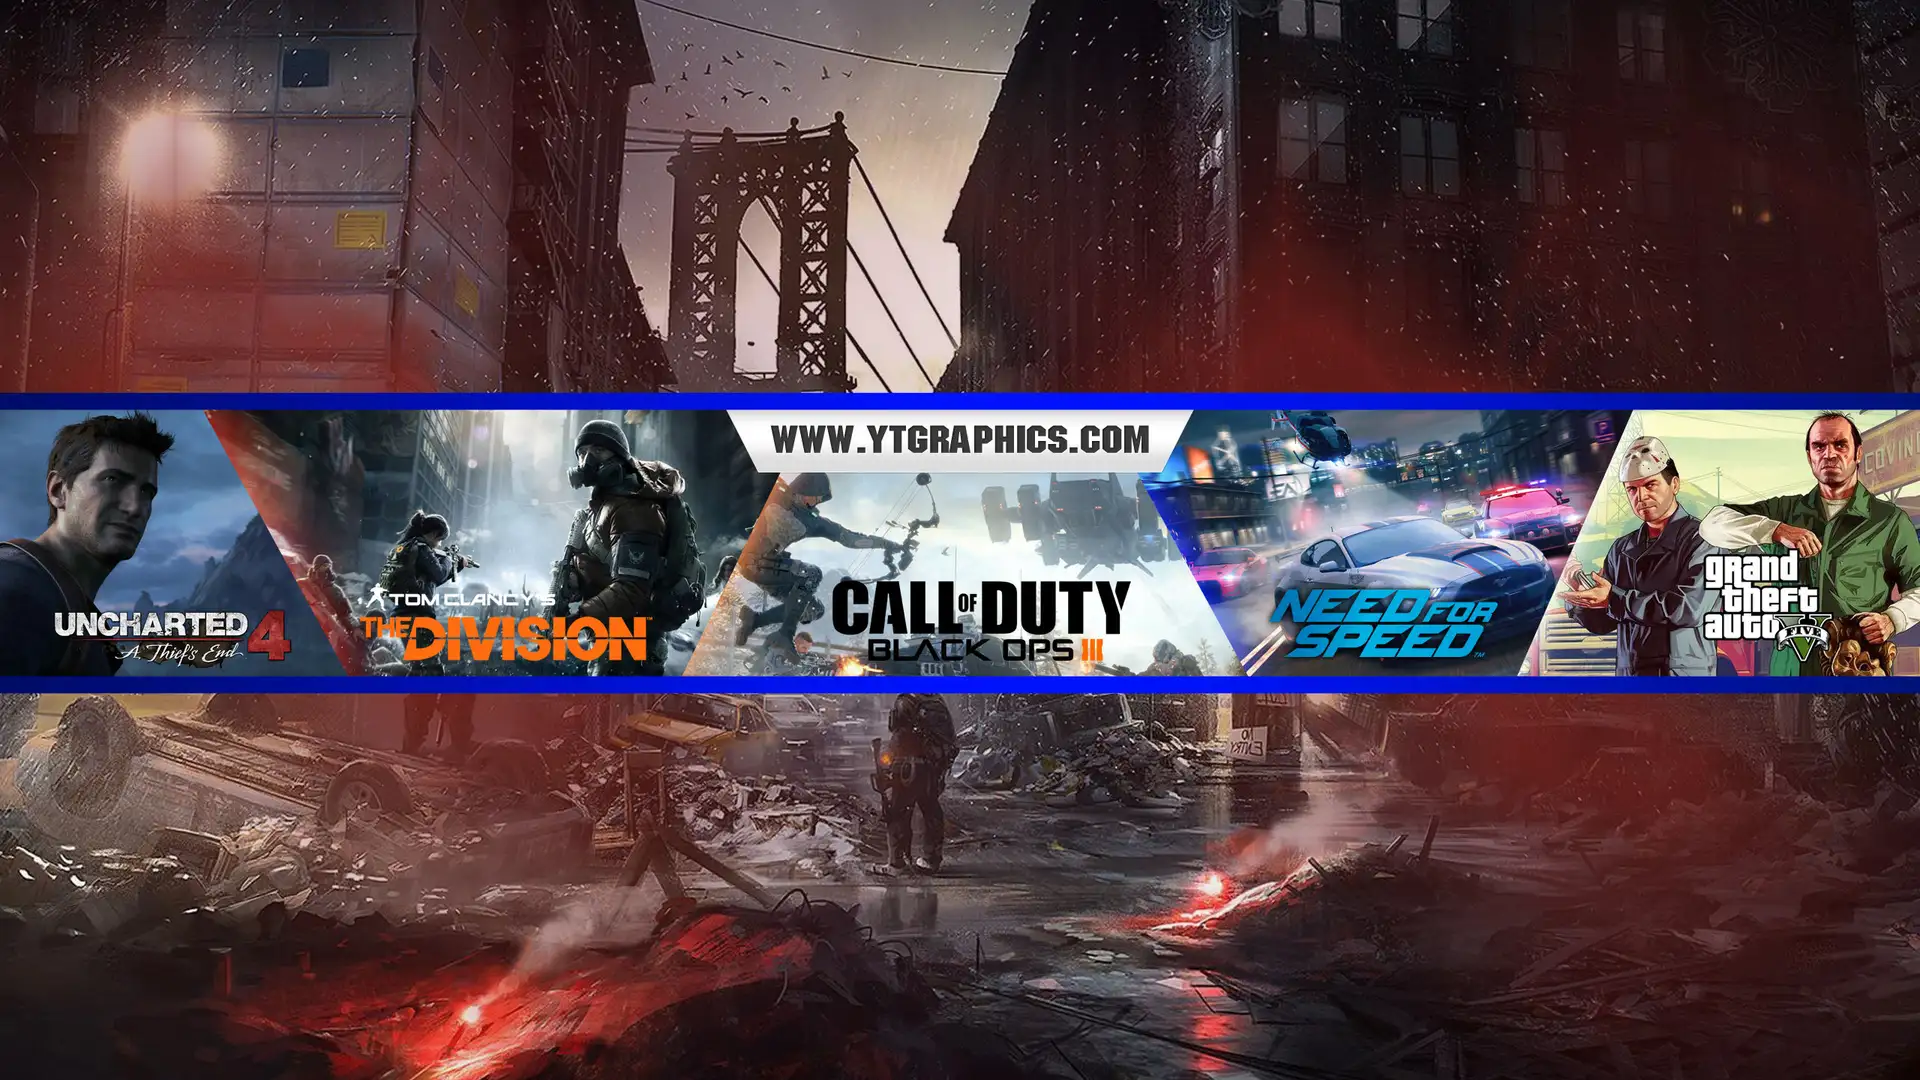 Uncharted, The Division, CoD: BO3, NFS, GTA V Banner